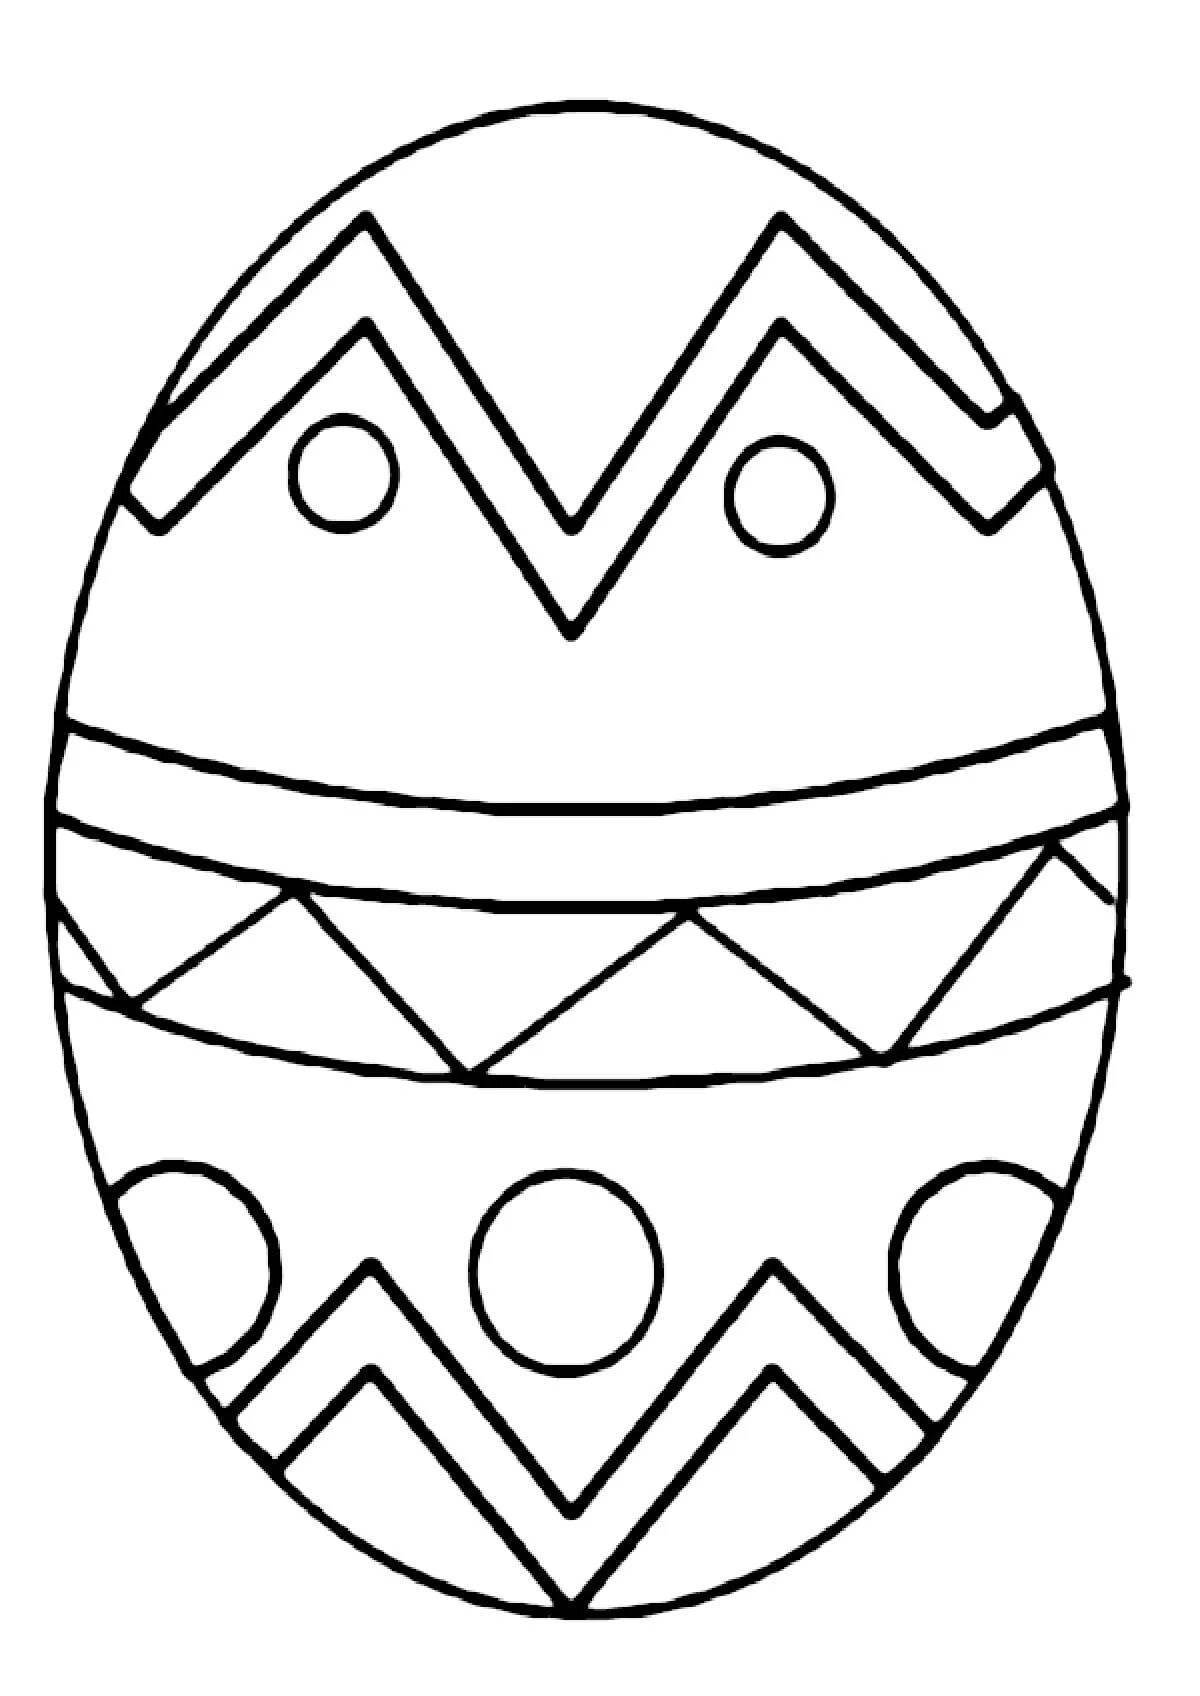 Fun Easter egg coloring for kids